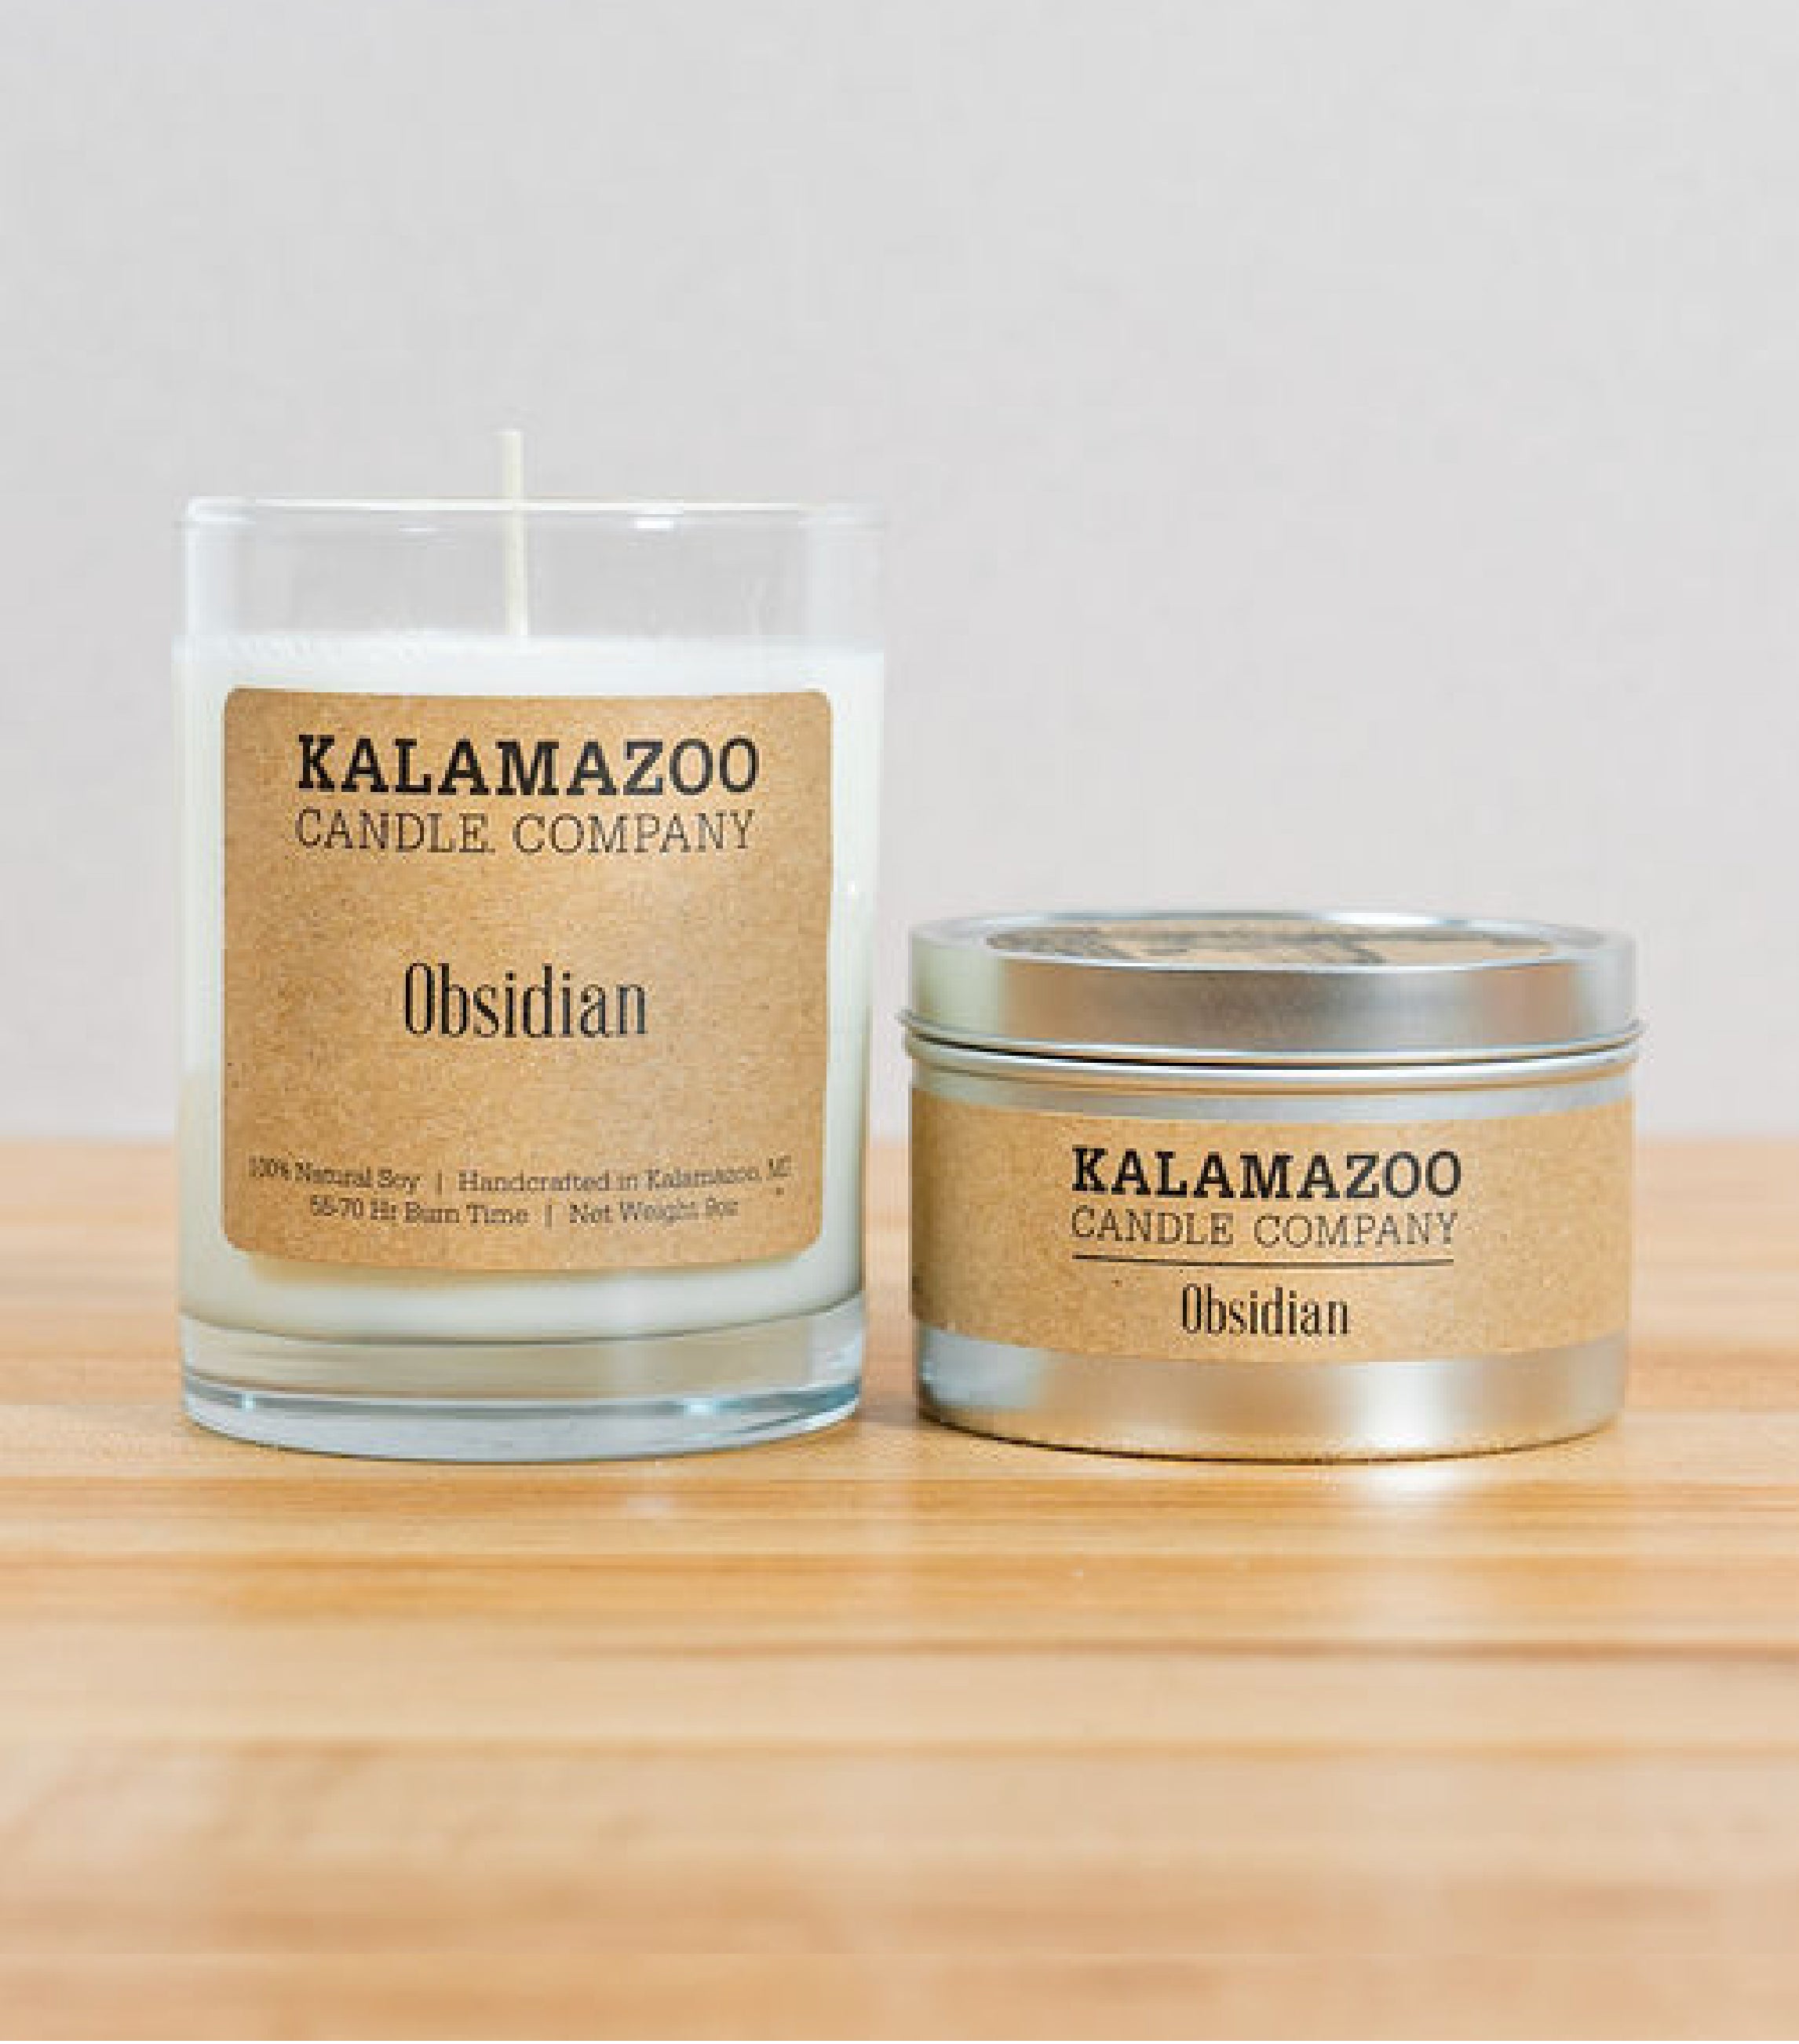 Obsidian Candles Warm island breezes bursting with sugared oranges, lemons, limes and exotic mountain greens, this classic soy candle smells like ripe citrus in a shaded oasis. All Kalamazoo Candles are: 100% natural scented soy wax; produced using locally sourced products.